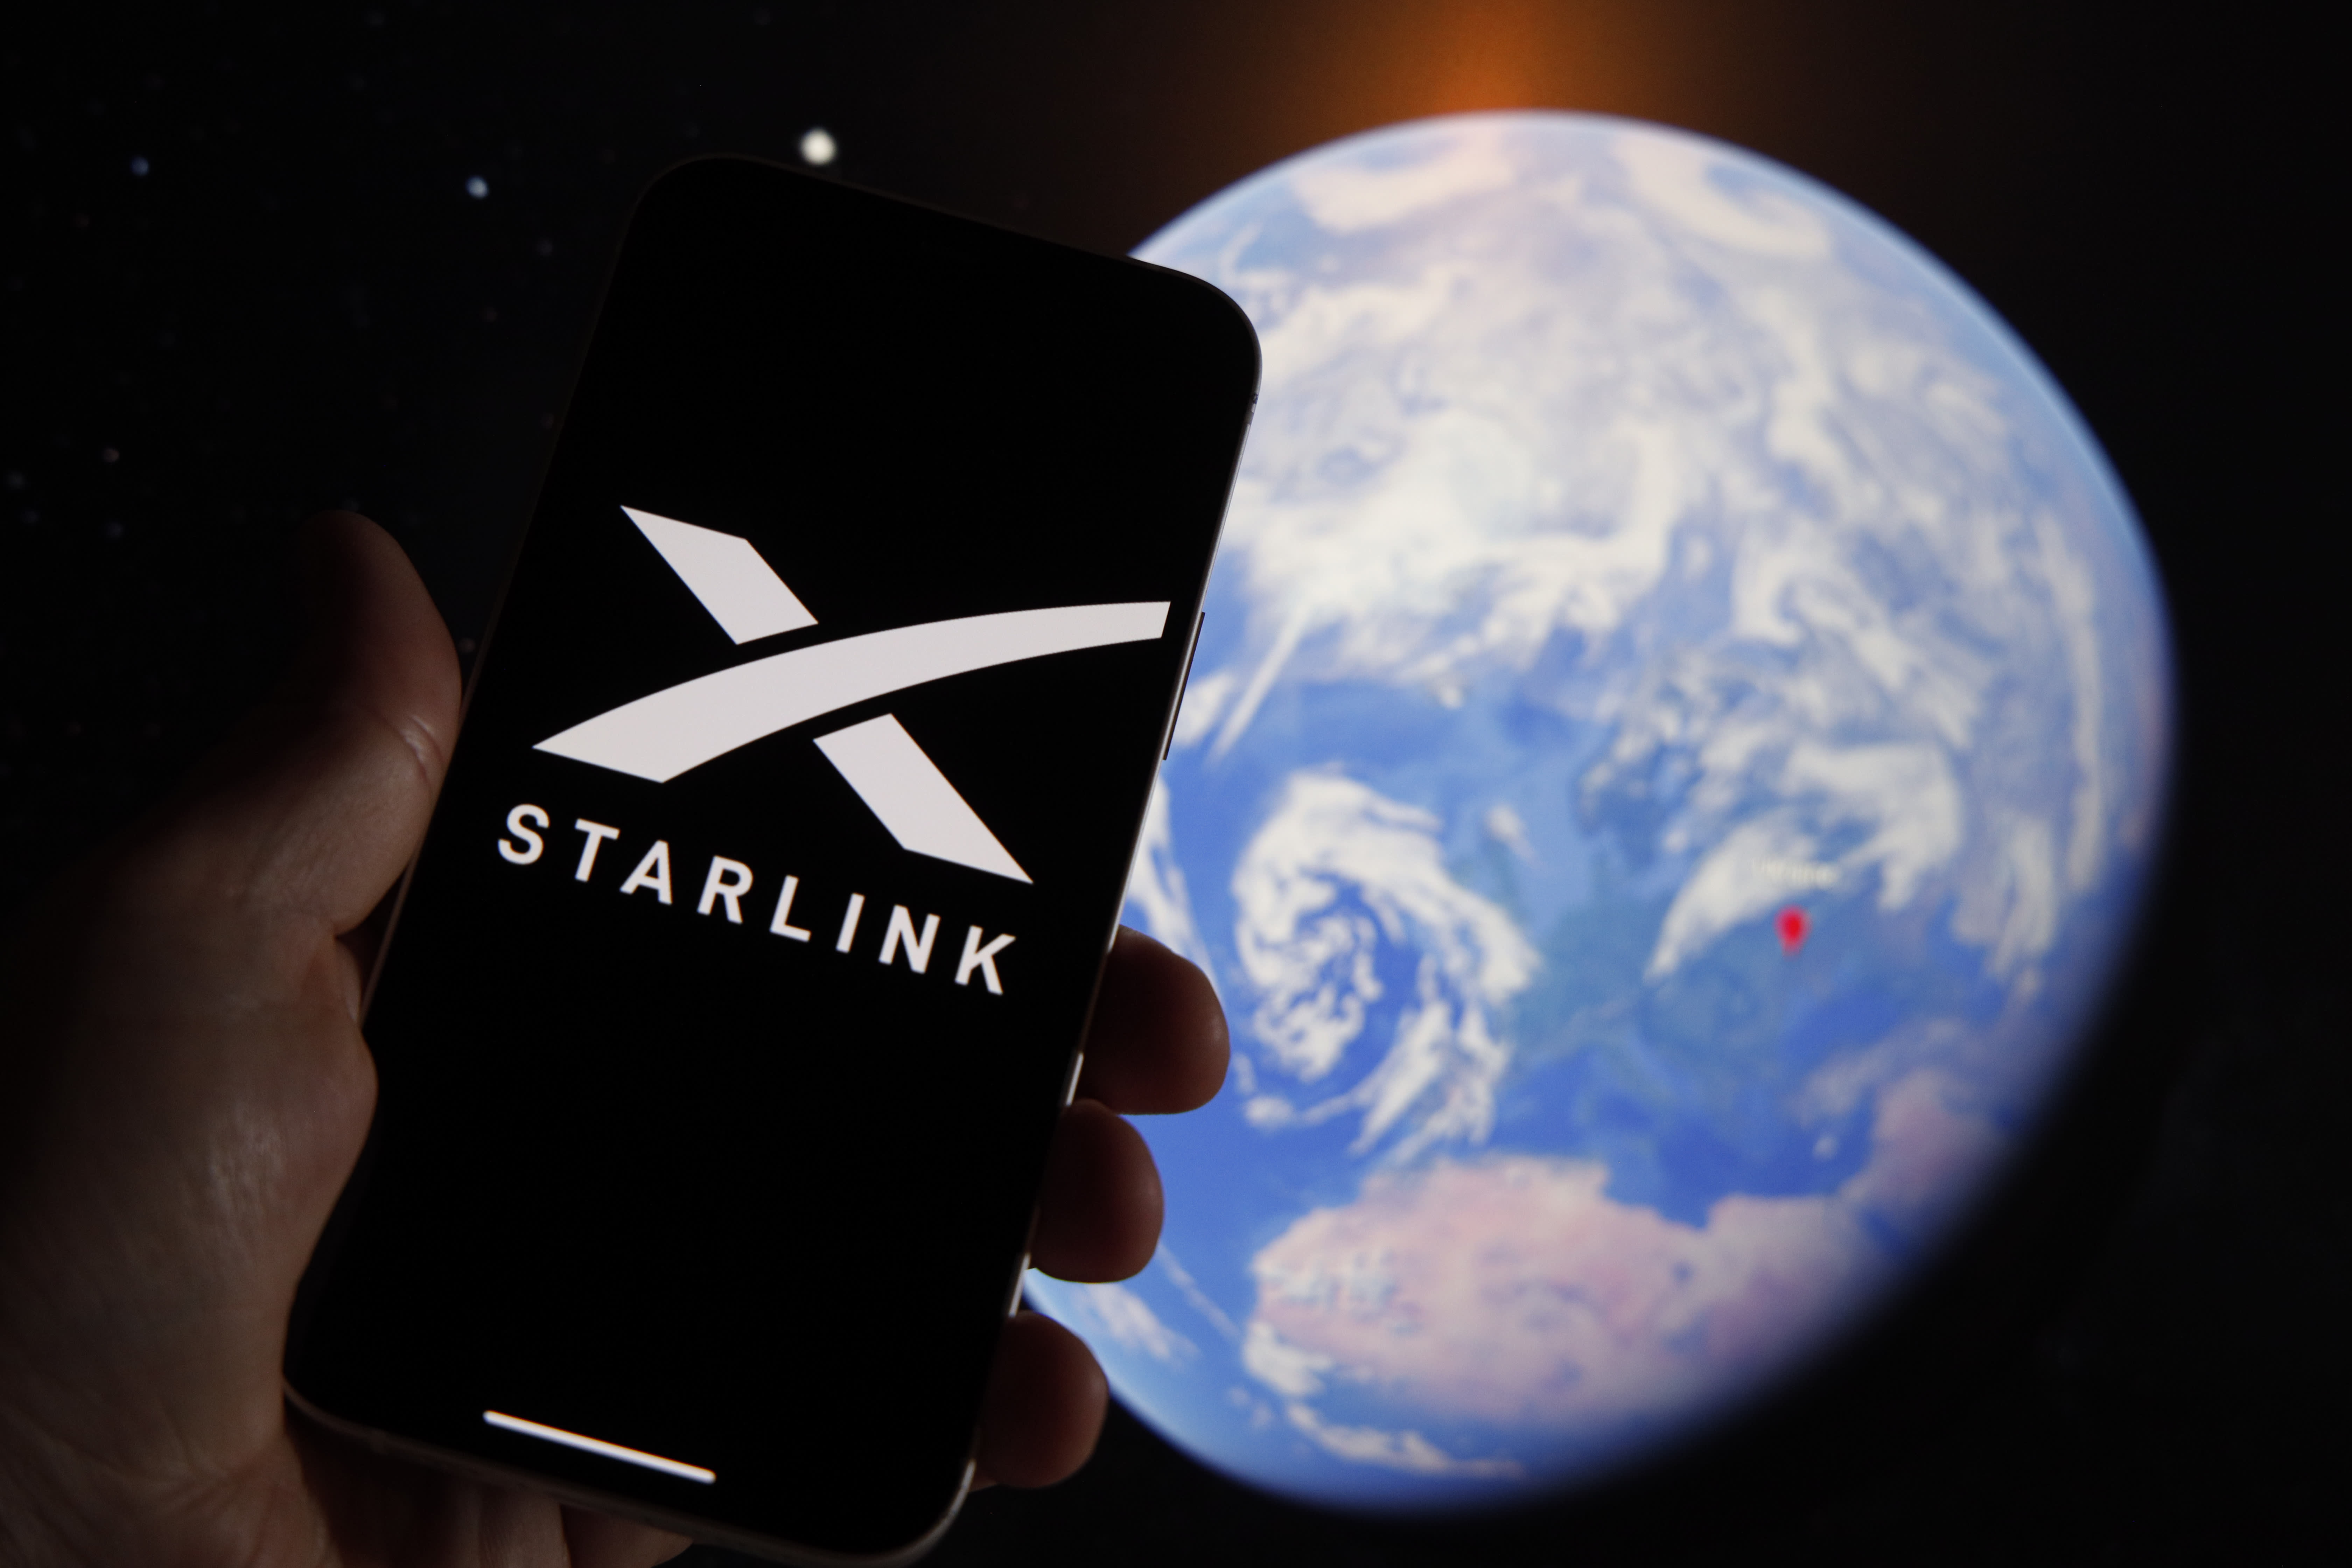 starlink applies for india's permission to set up earth stations in the country